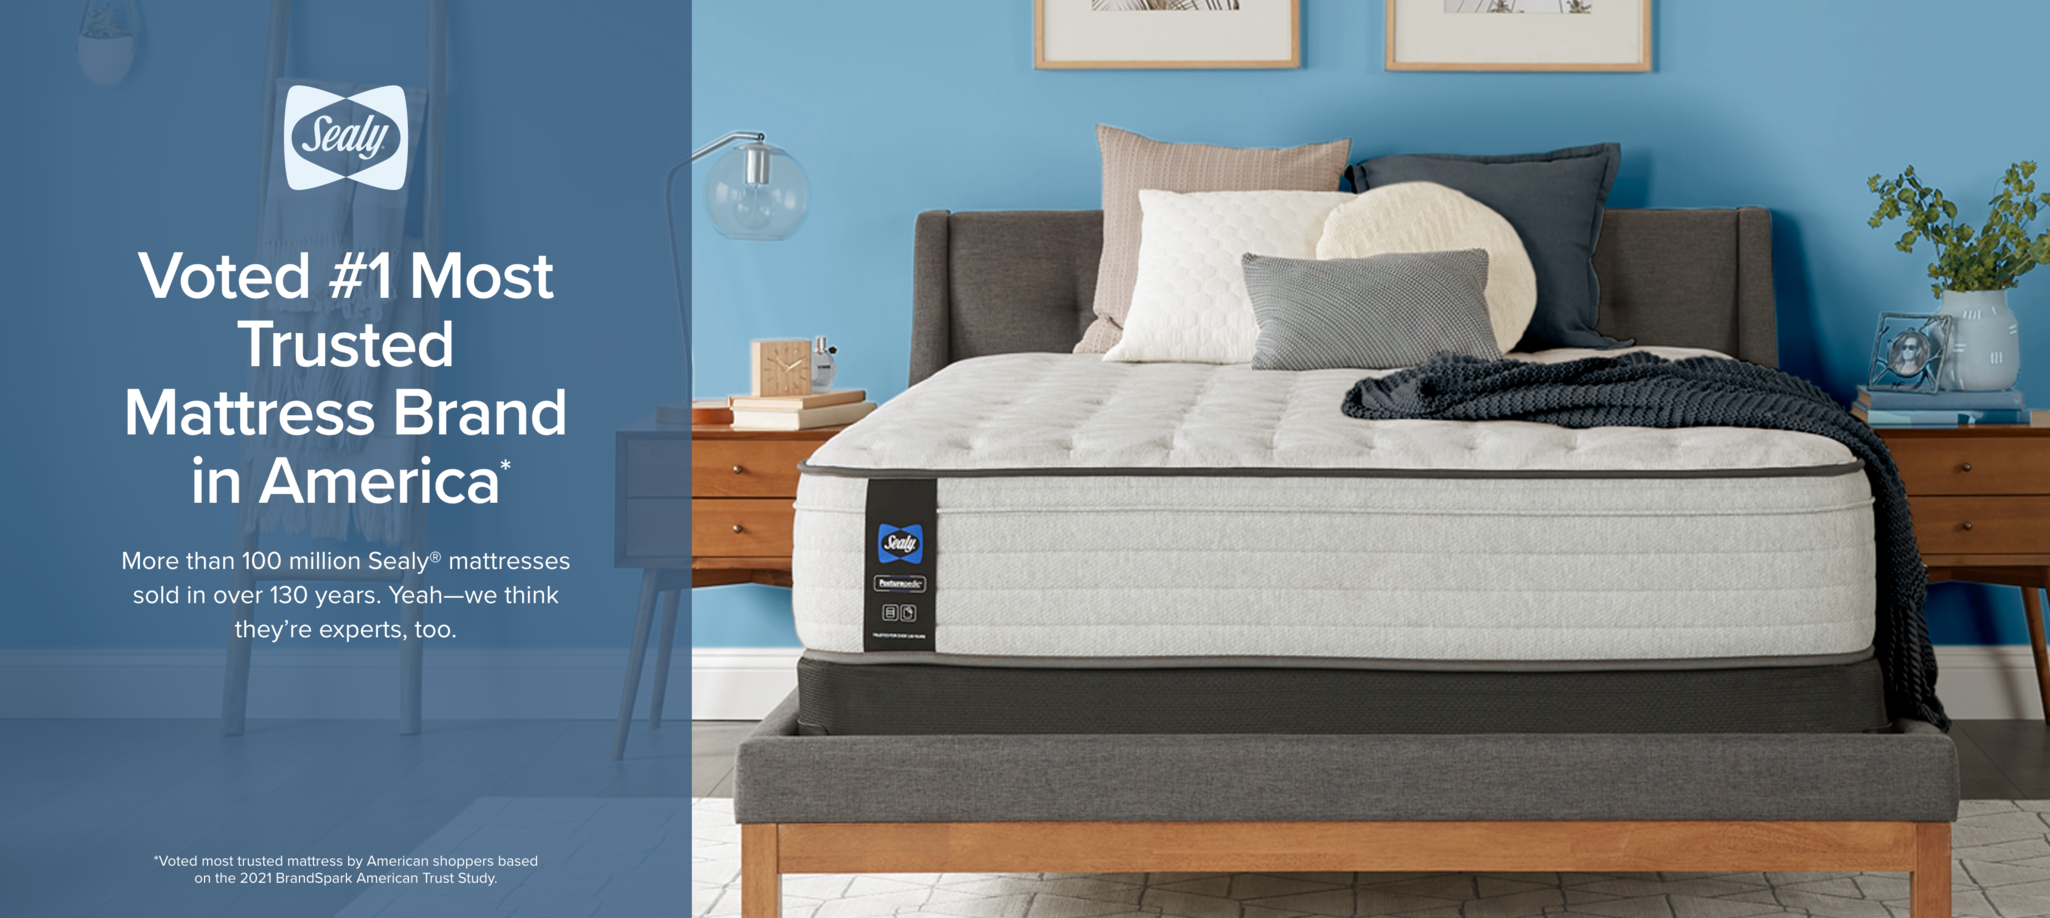 Sealy Mattresses - Voted #1 Most Trusted Mattress Brand In America - Shop Now